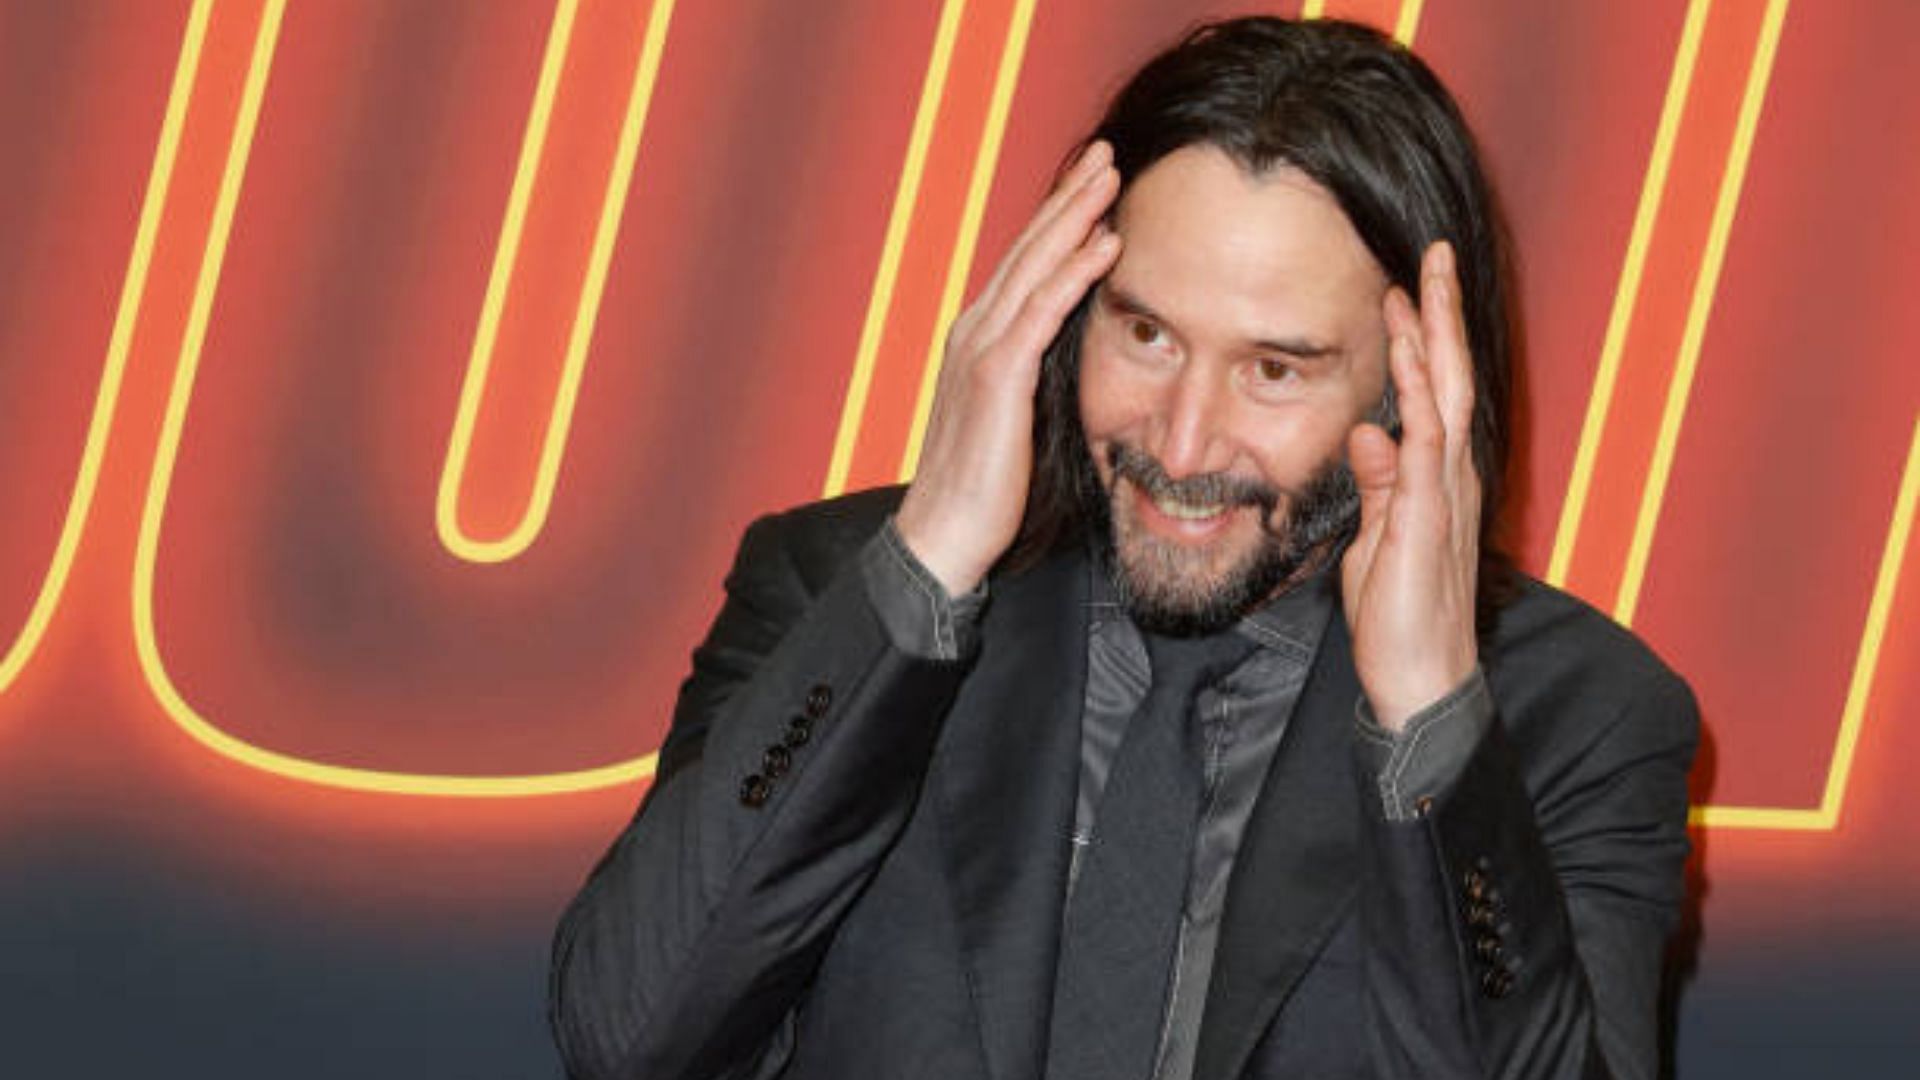 Keanu Reeves becomes a source of surprising memes and social media entries (Image via Getty)